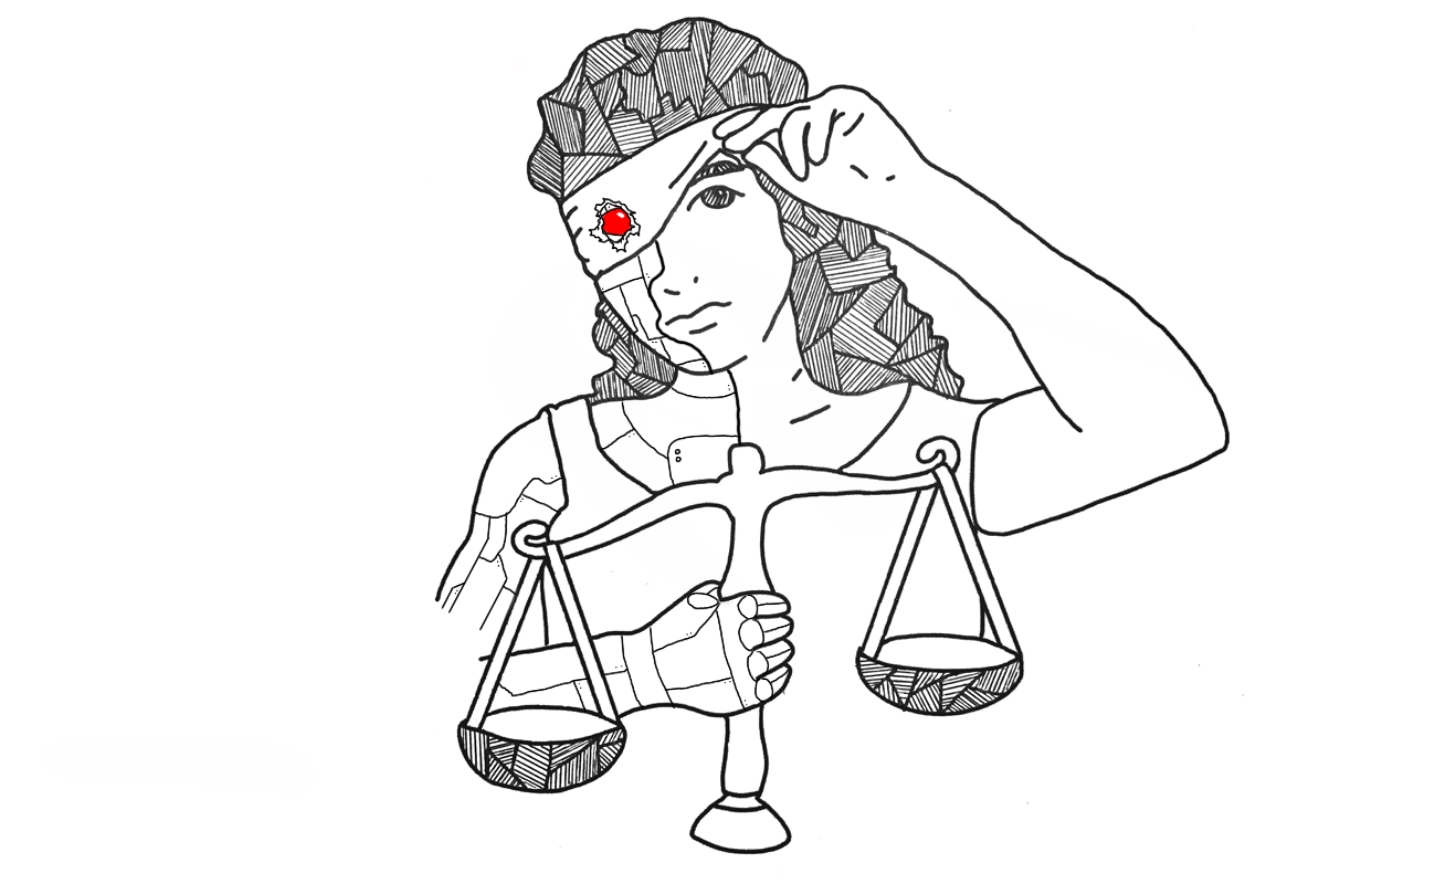 cyborg lady justice1 (2) – Extralegal